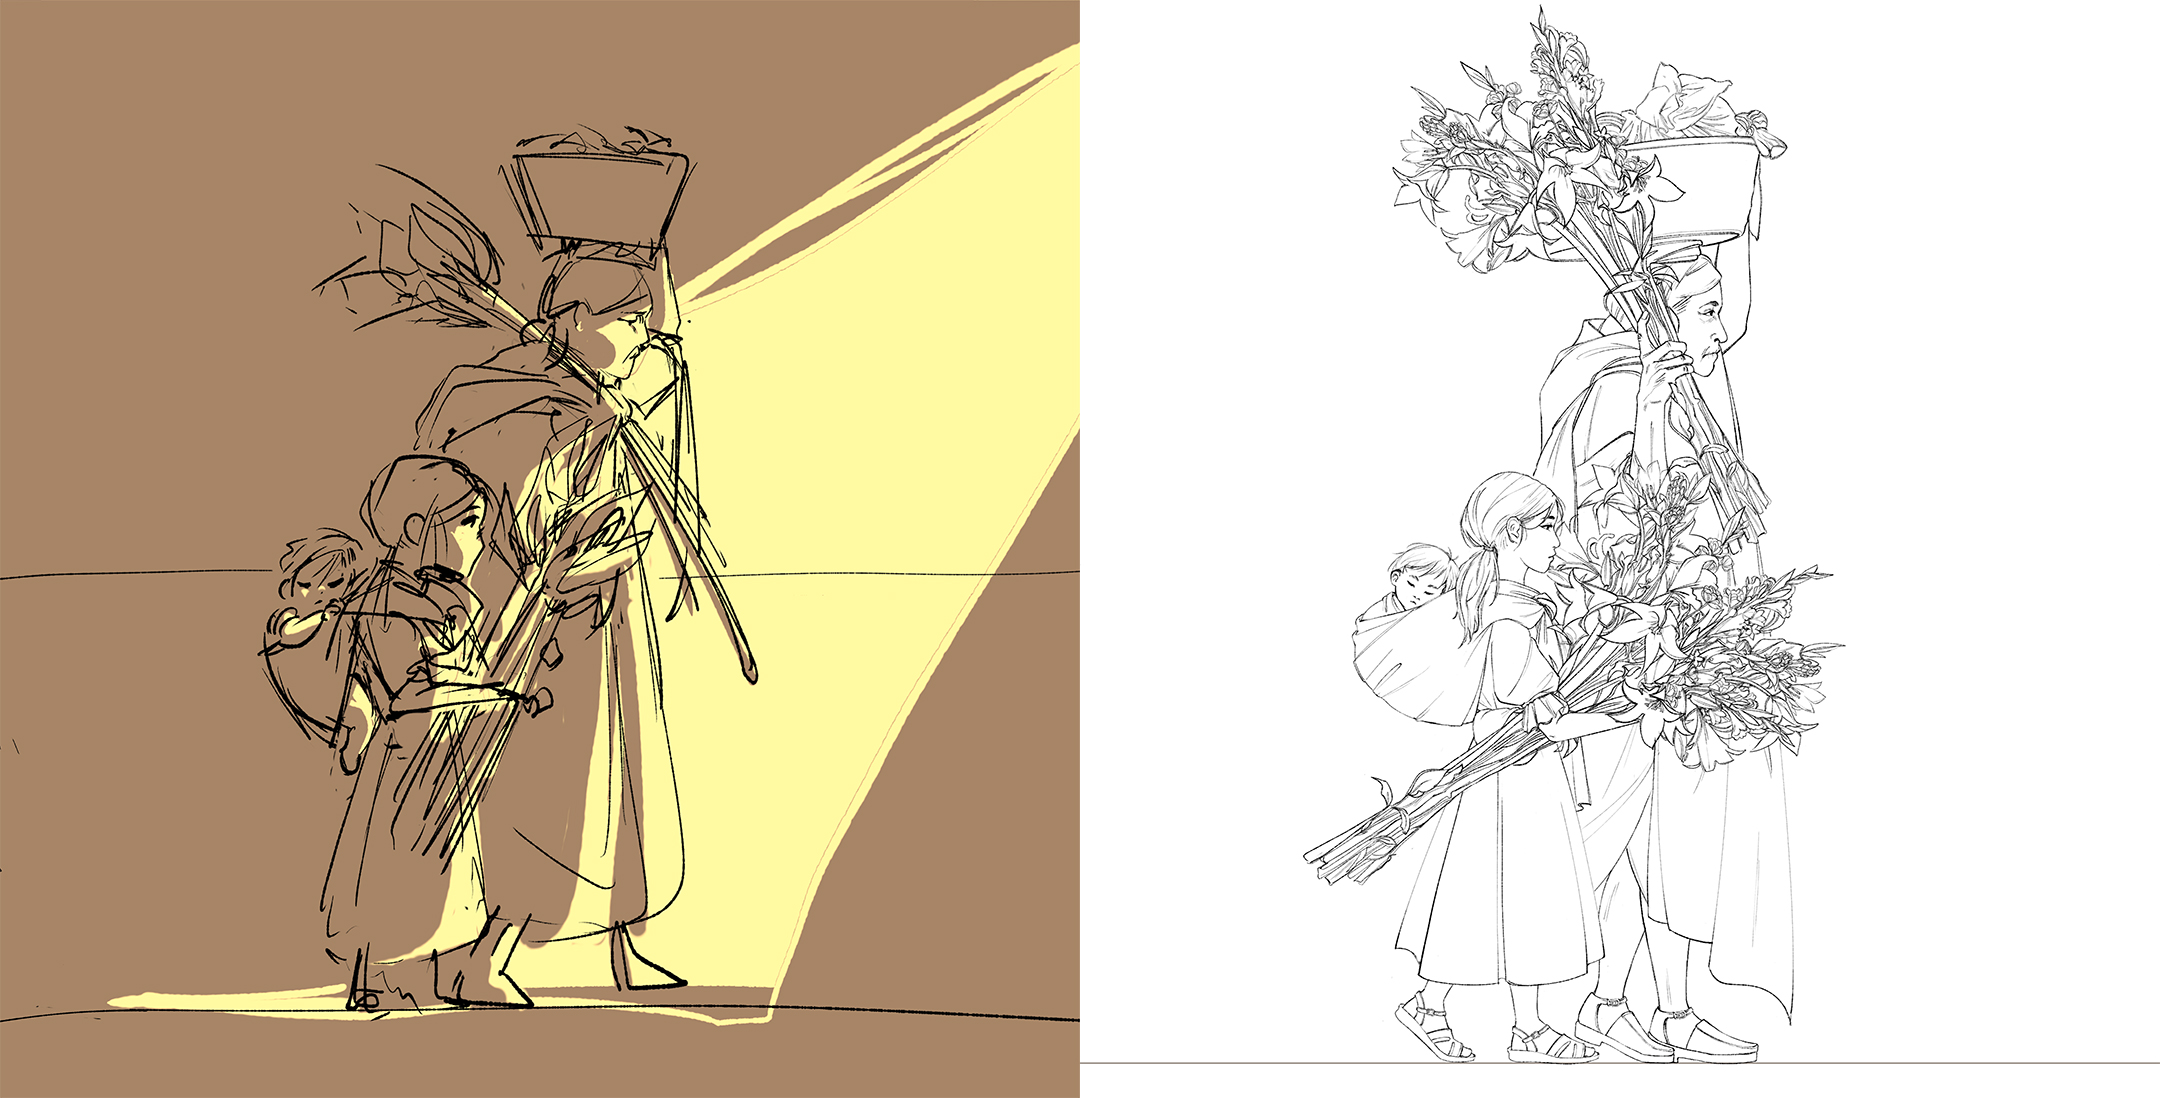 Two side-by-side process images of the old woman illustration, the one on the left in brown and yellow and the one on the right in black and white